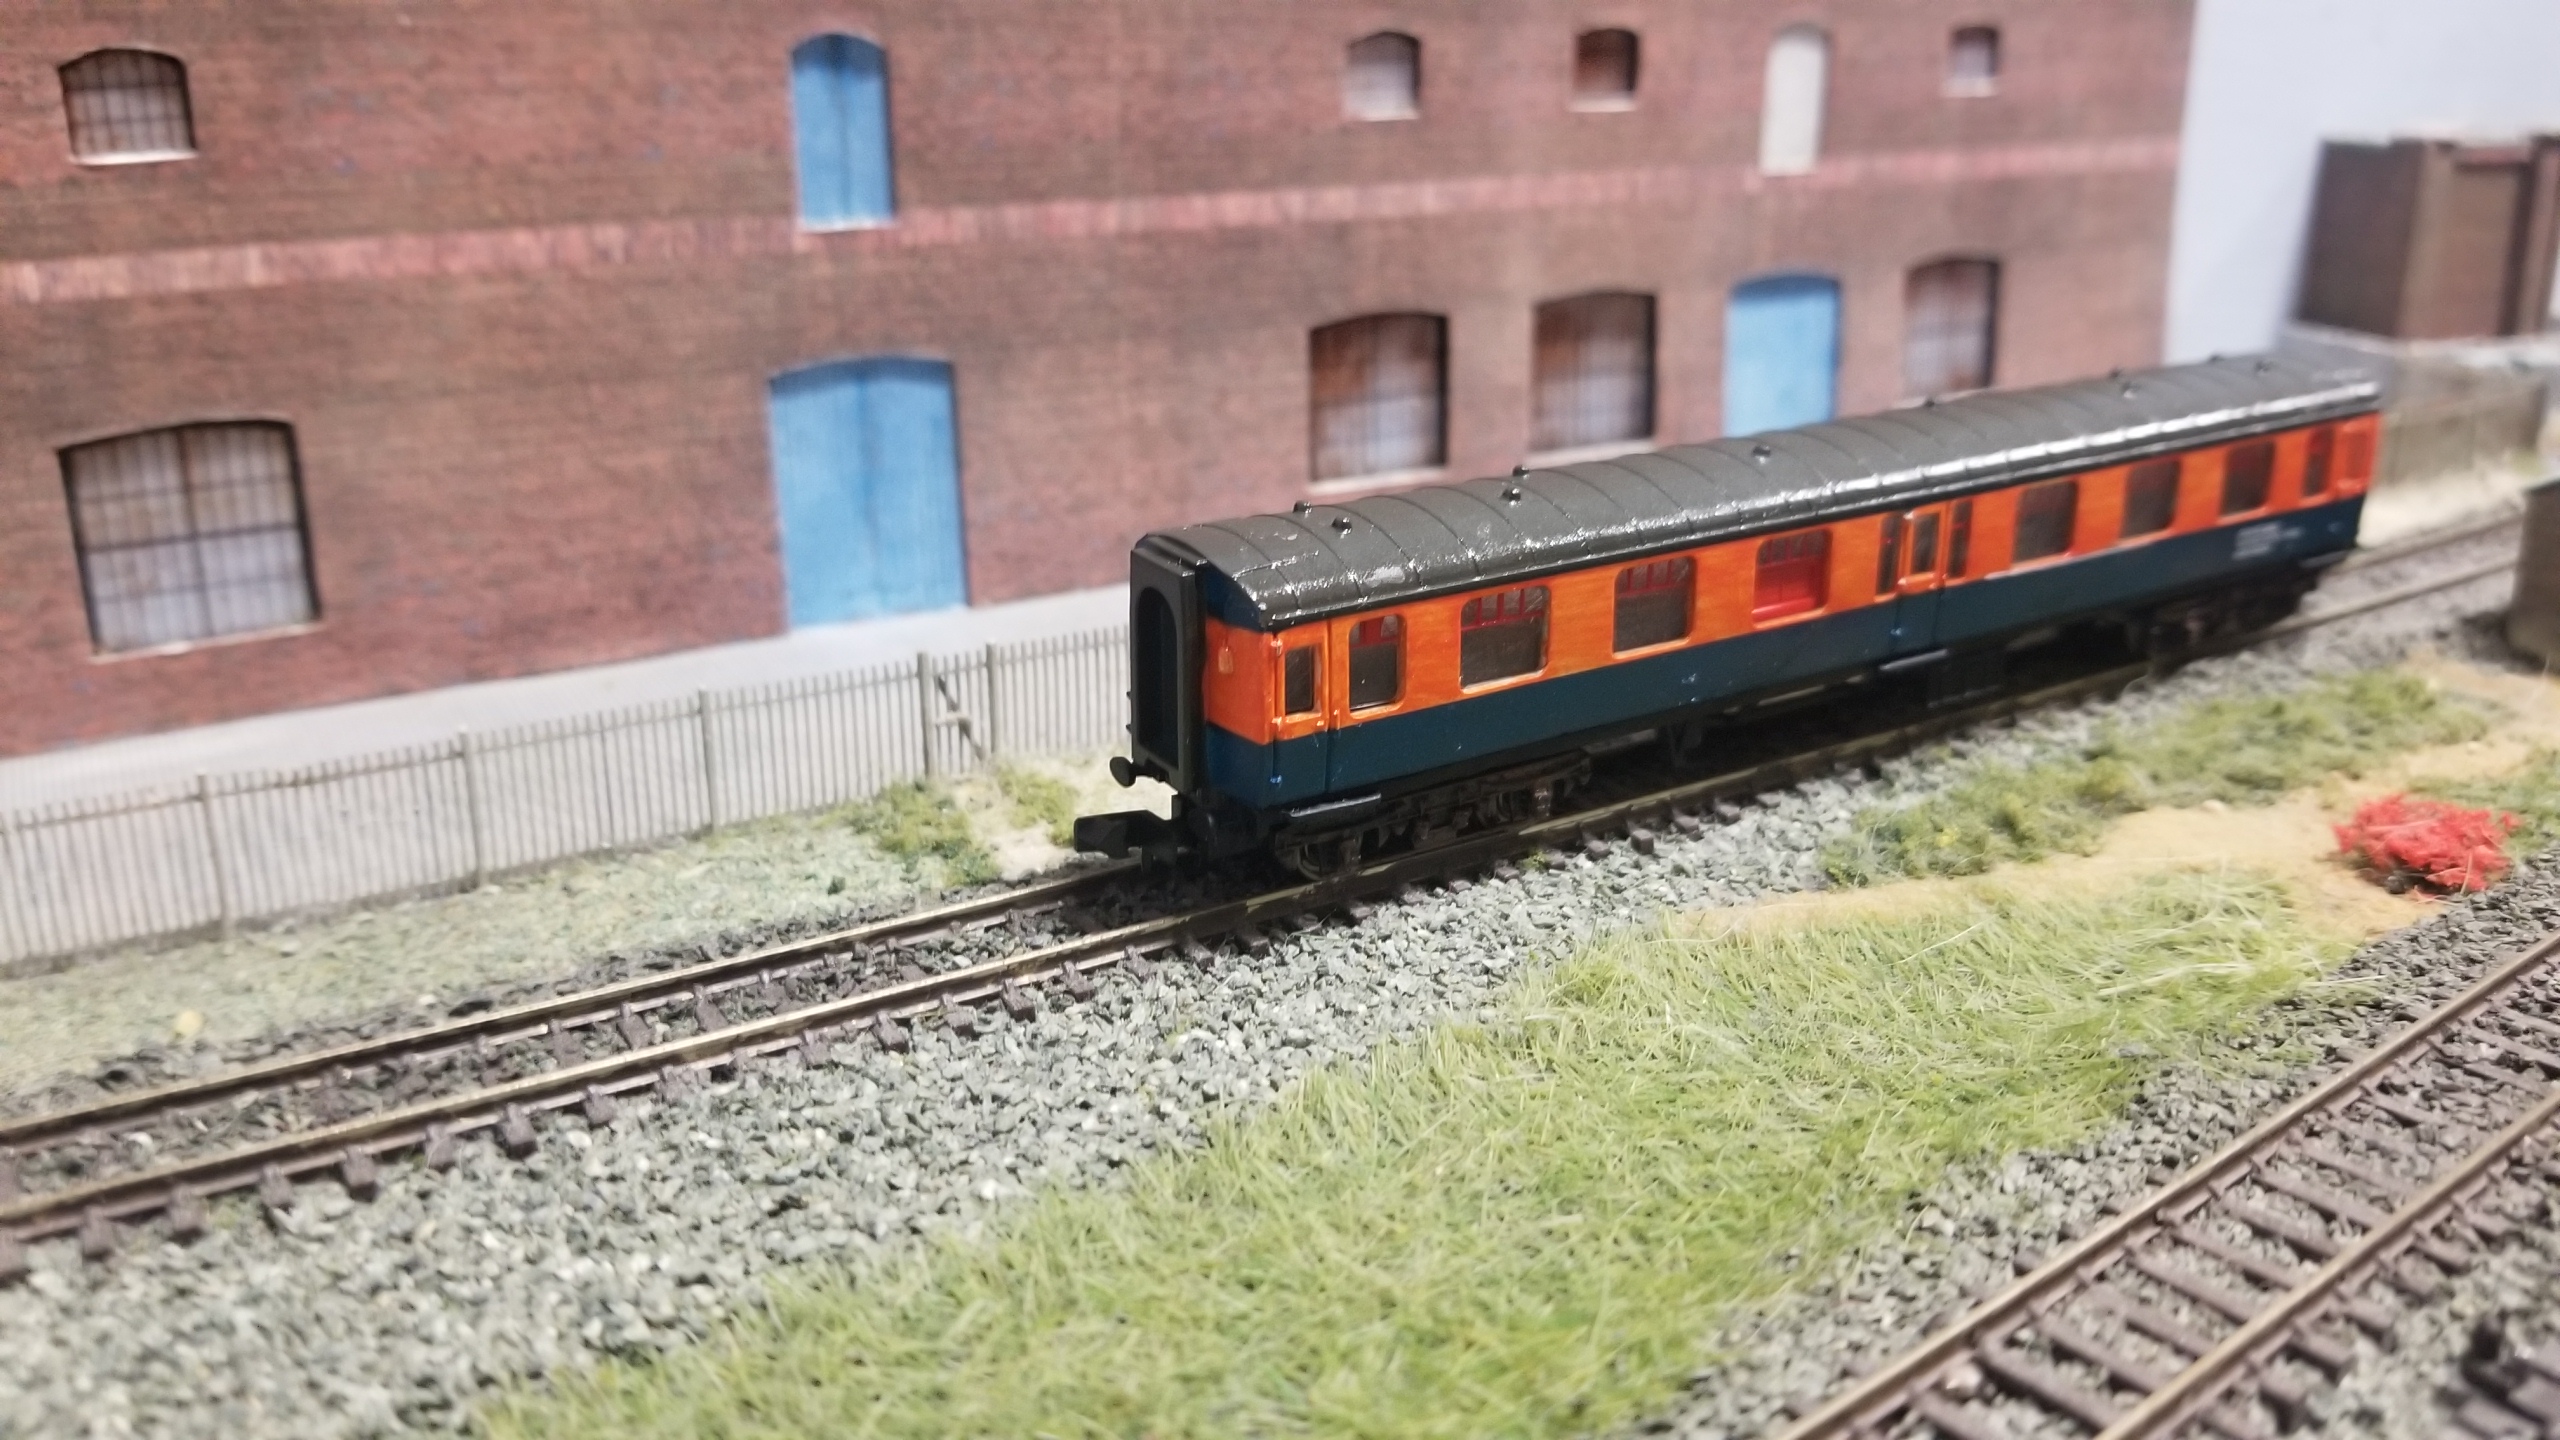 RDB975630 - Test Service Car No8 in RTC Red & Blue livery. © Bees Hill Models, all rights reserved.